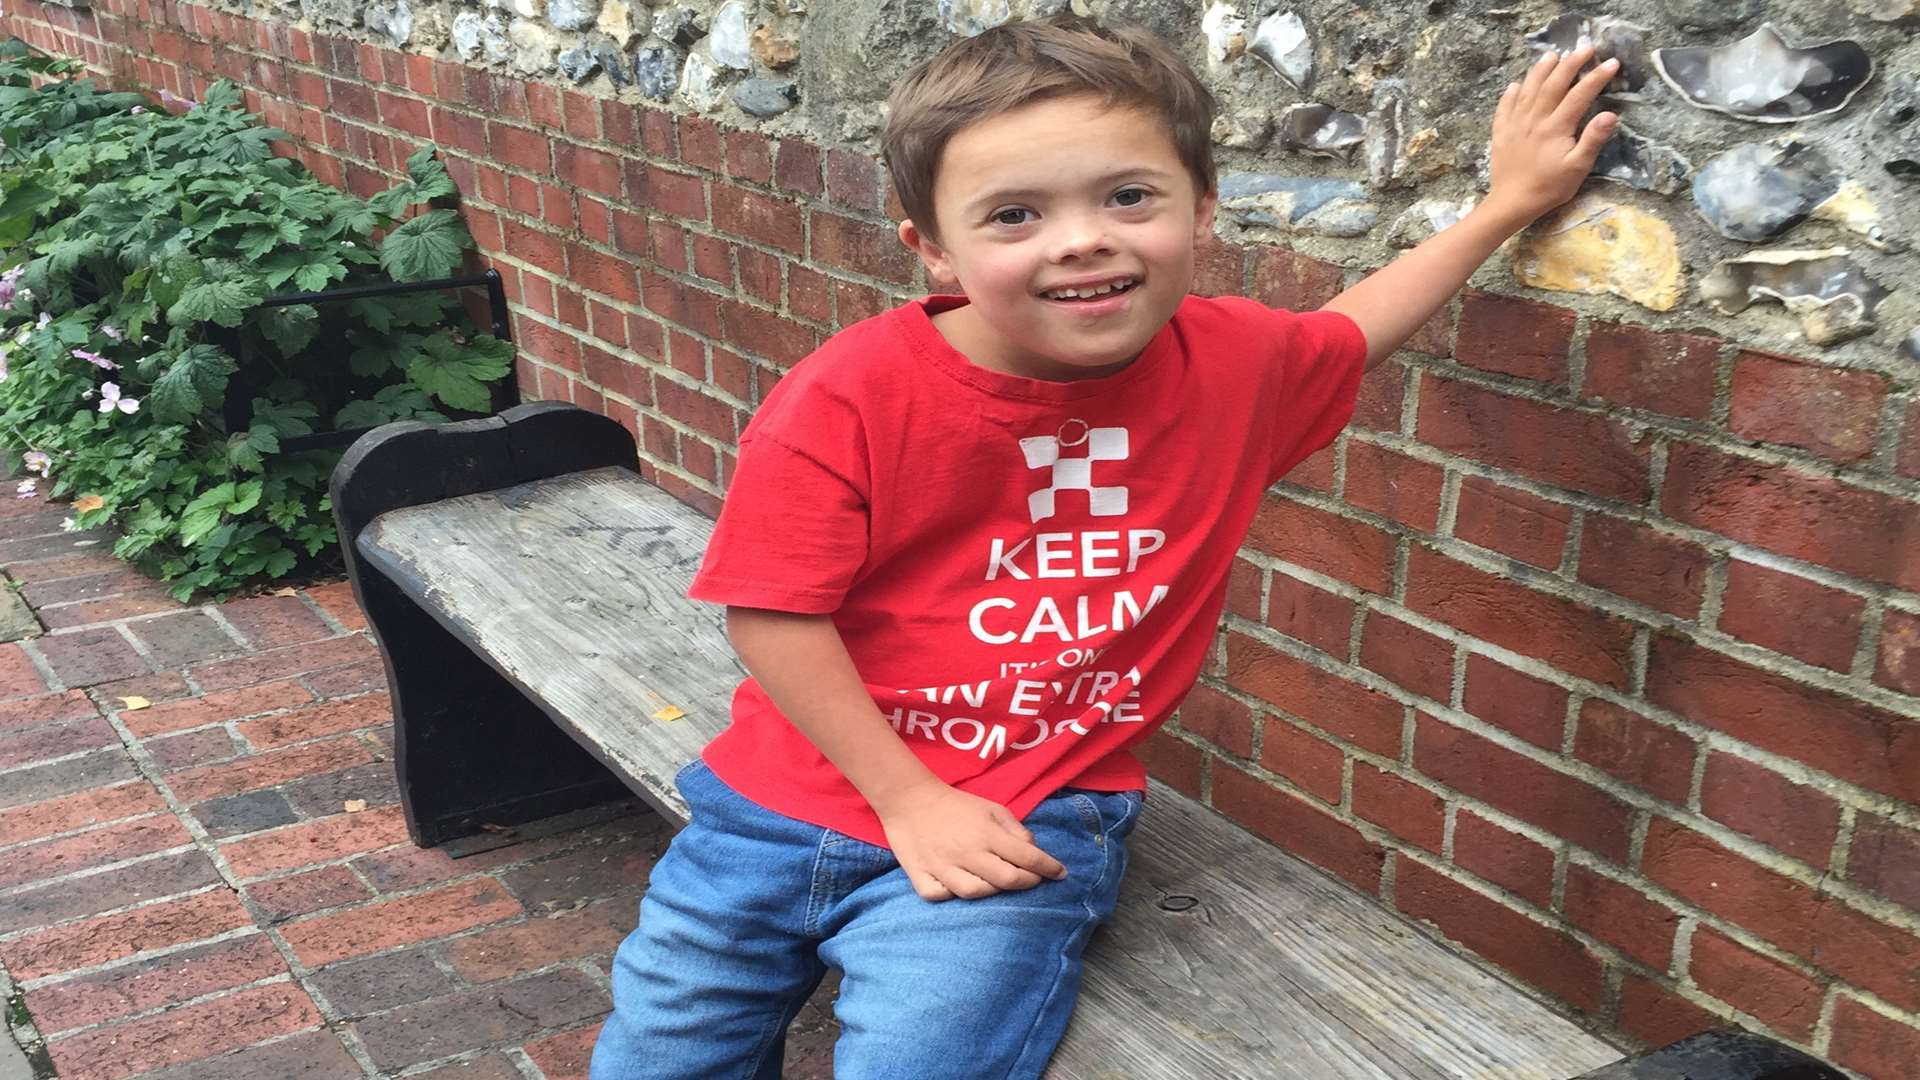 Samuel Ralph, 9, who was born with Downs Syndrome